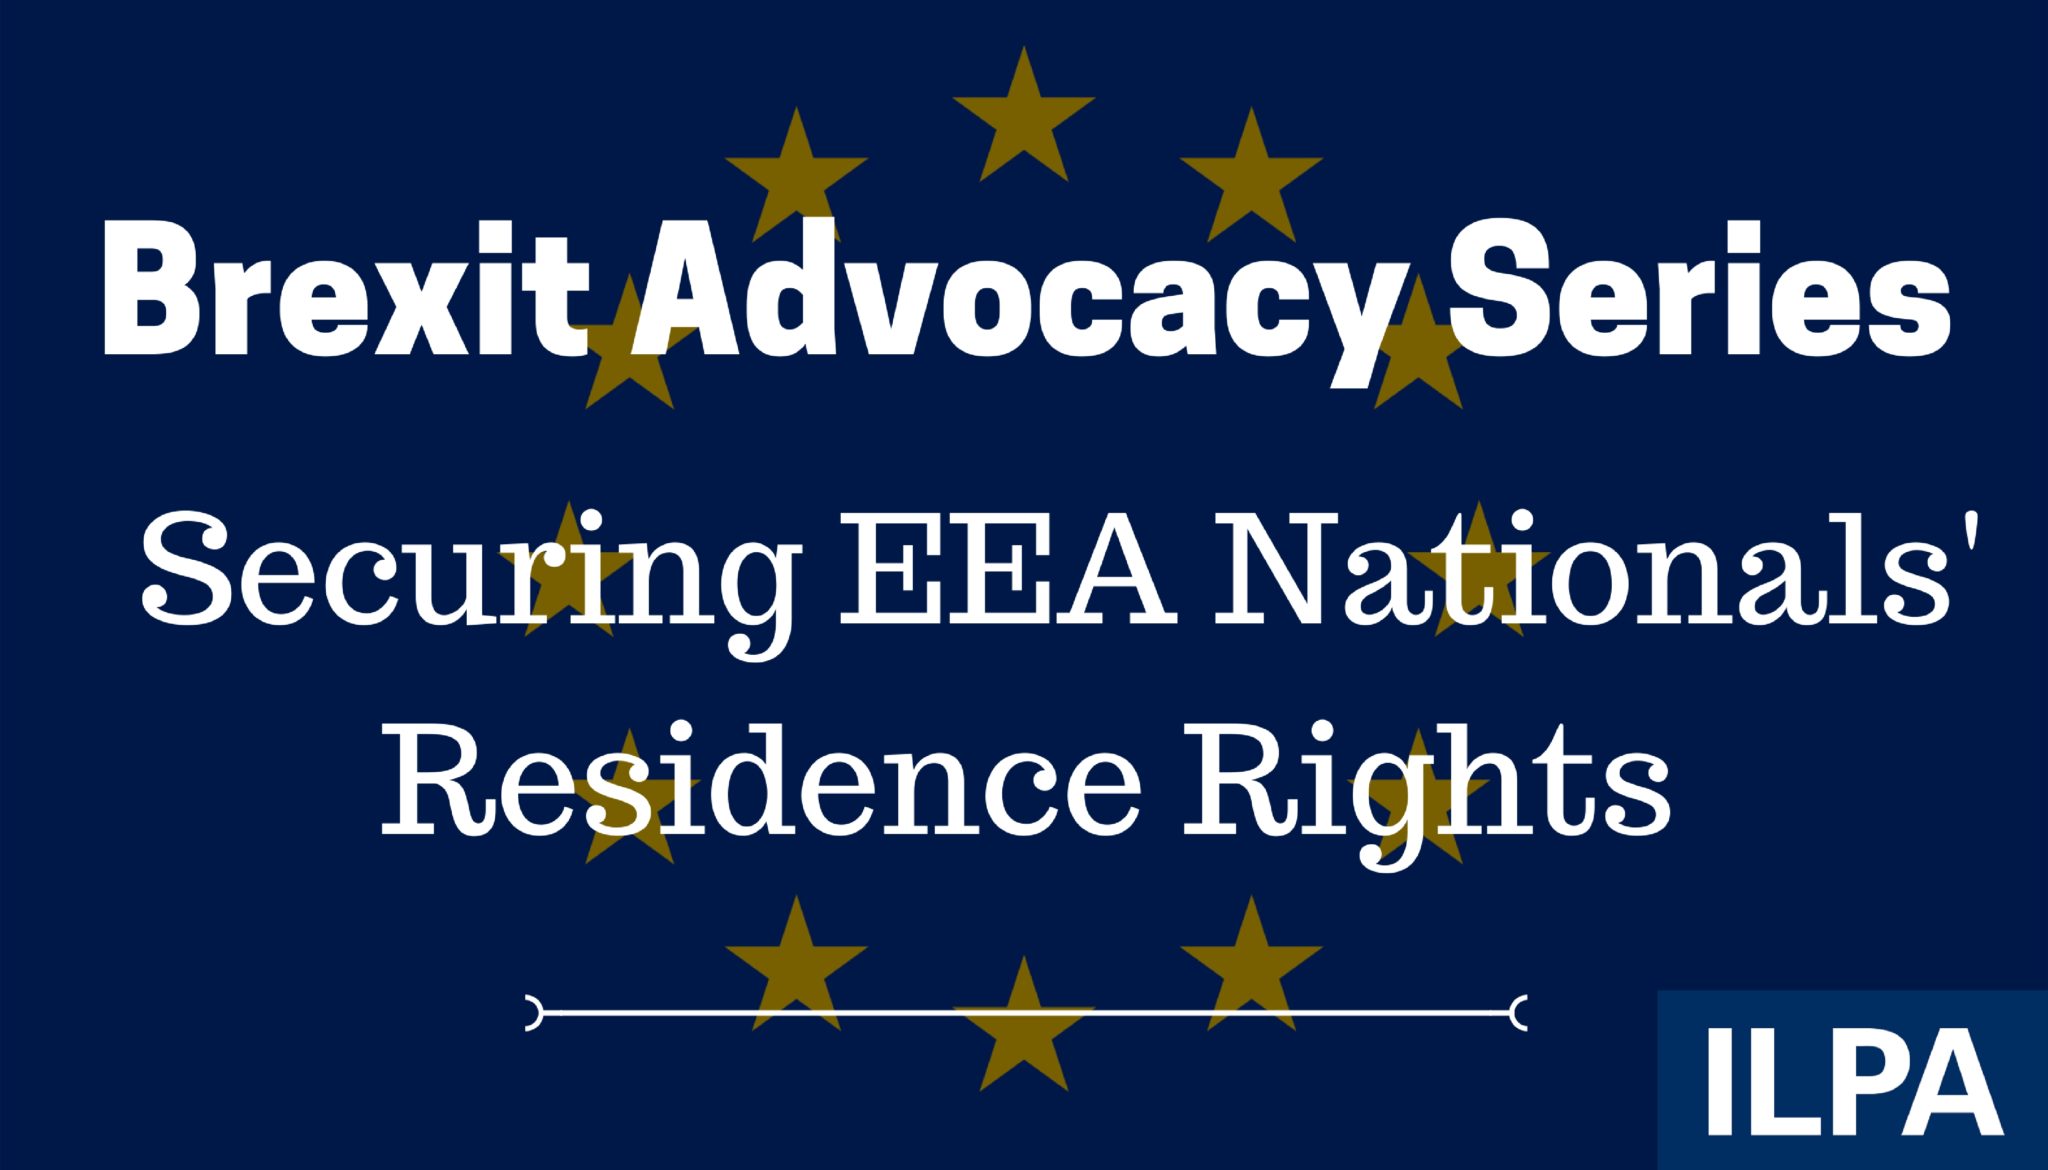 Brexit briefing: Securing EEA Nationals’ Residence Rights